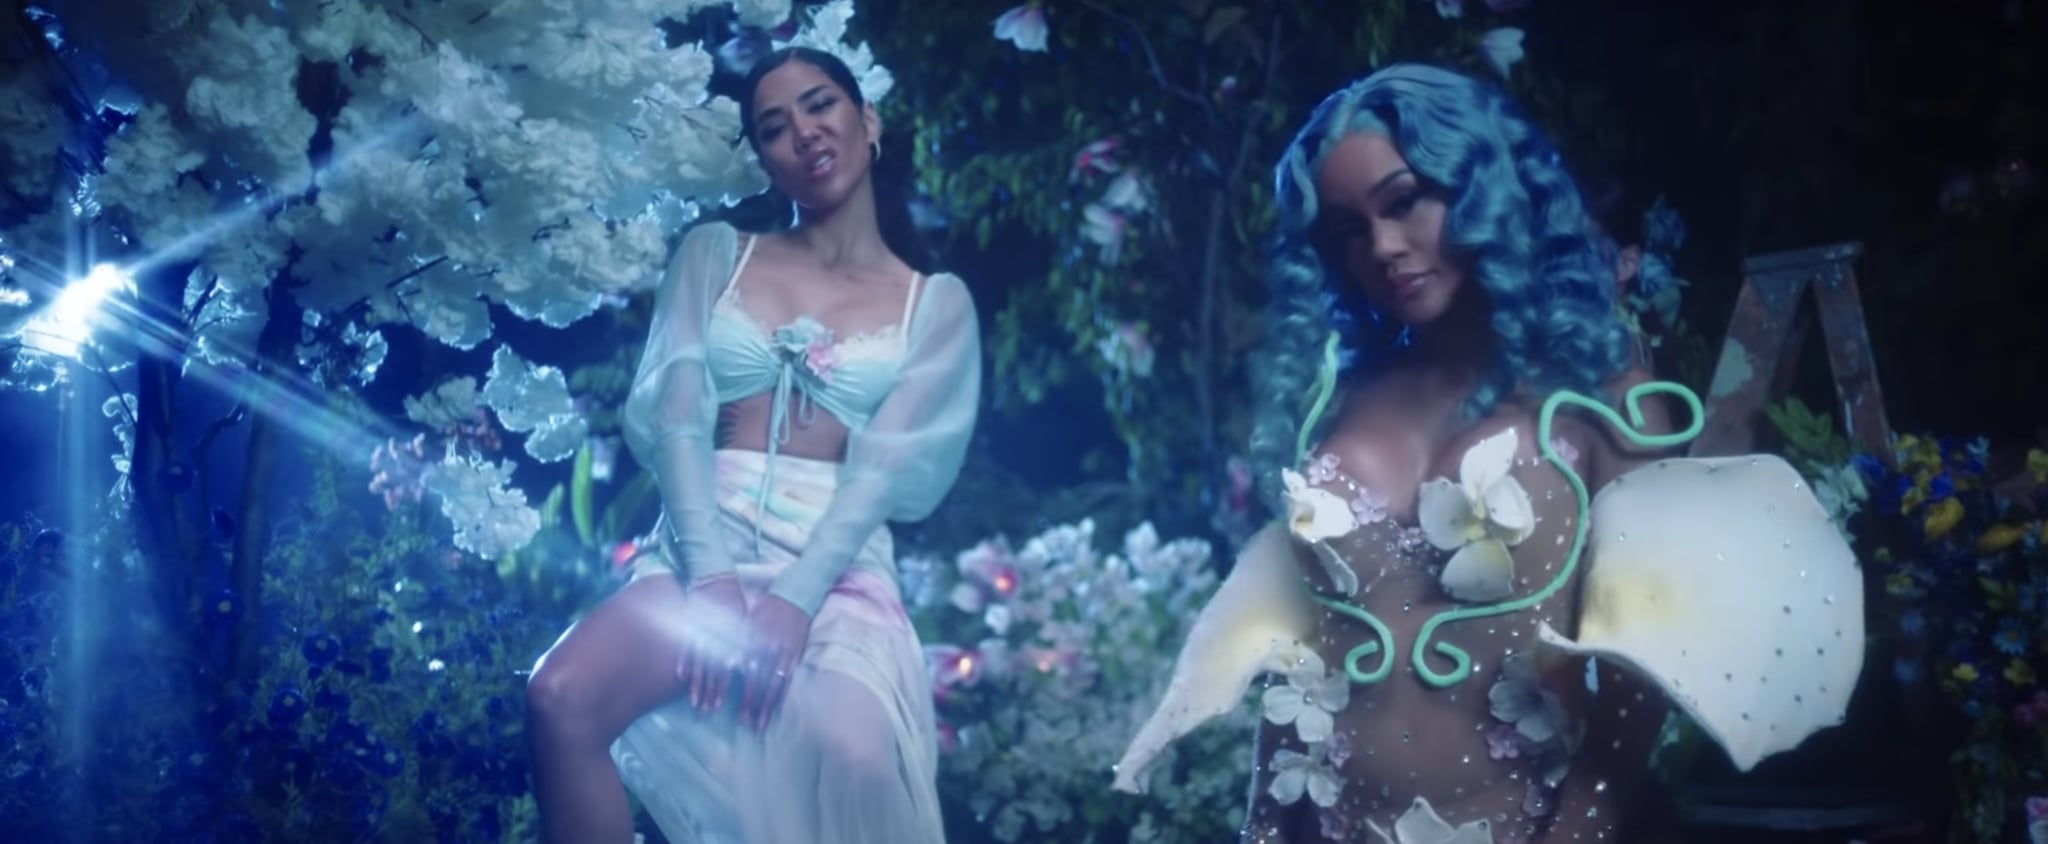 Saweetie Drops 'Back to the Streets' Video Featuring Jhené Aiko